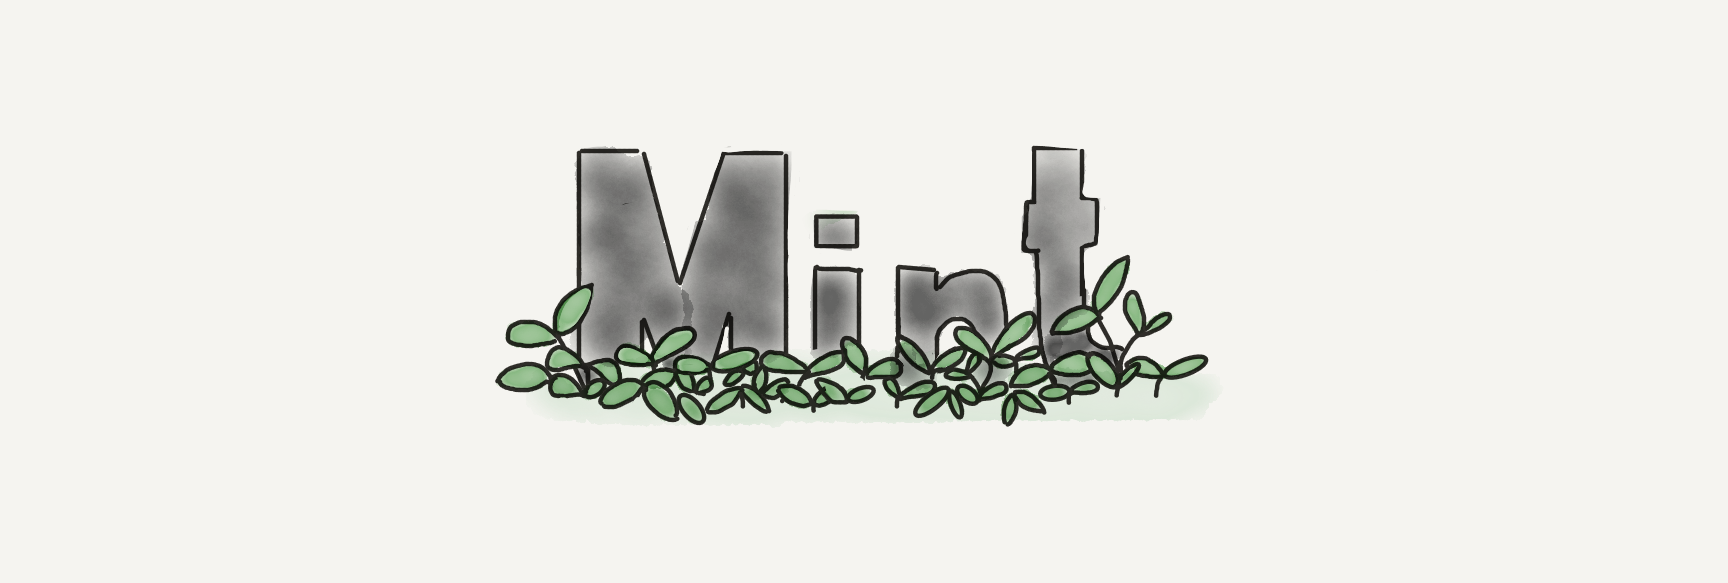 Mint: How to manage your tooling with min